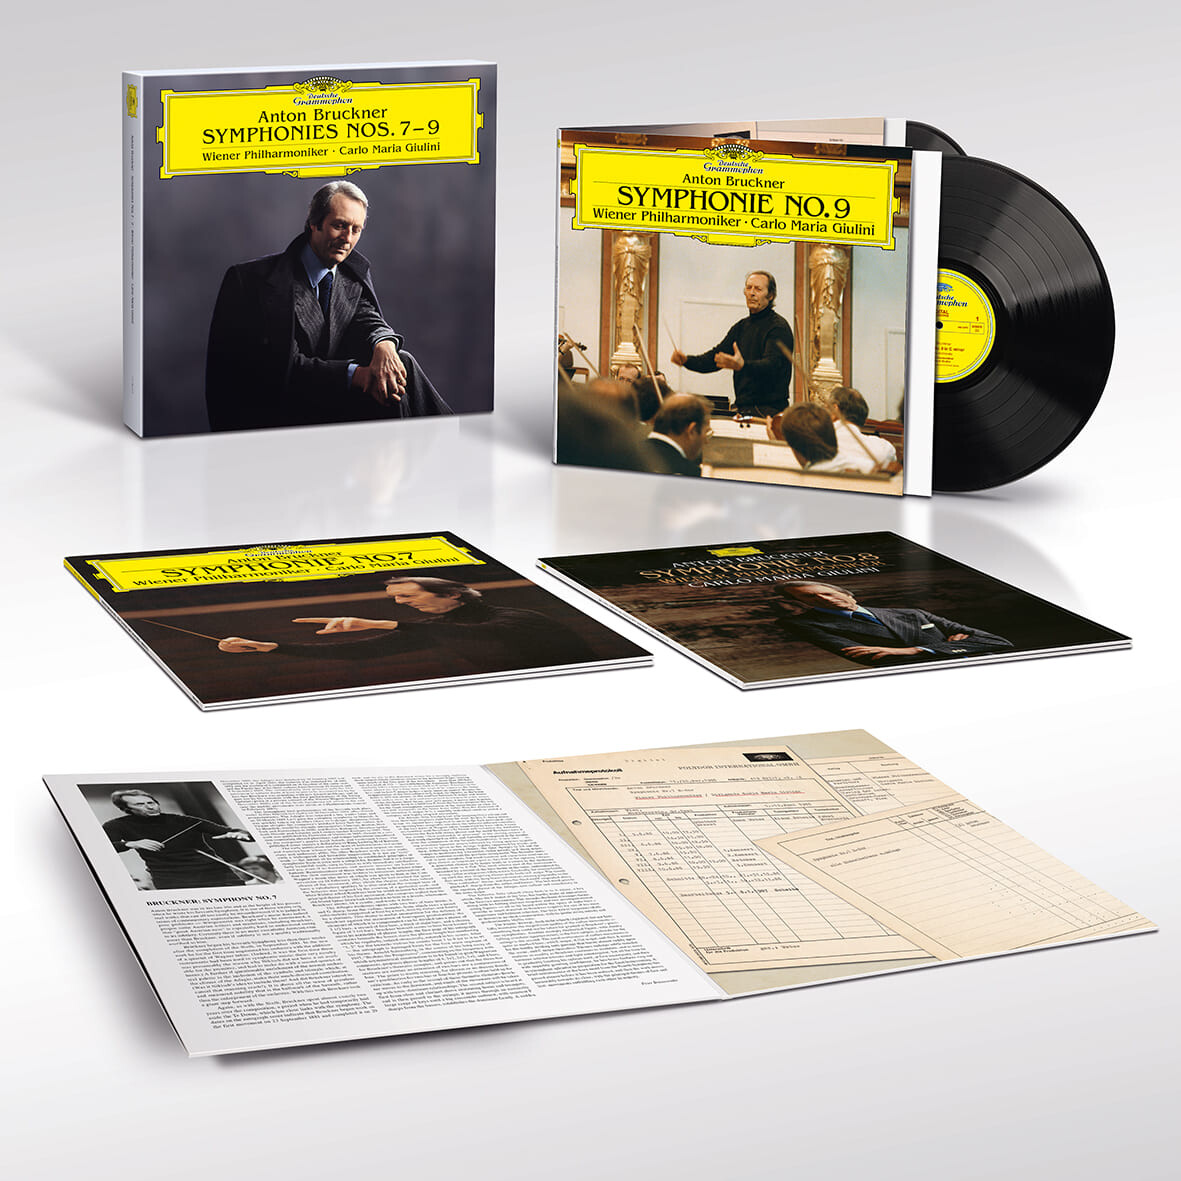 Giulini Meets Bruckner: DG’s Classic Recordings by the Italian Maestro Given New Life on Vinyl by Emil Berliner Studios - Part 2